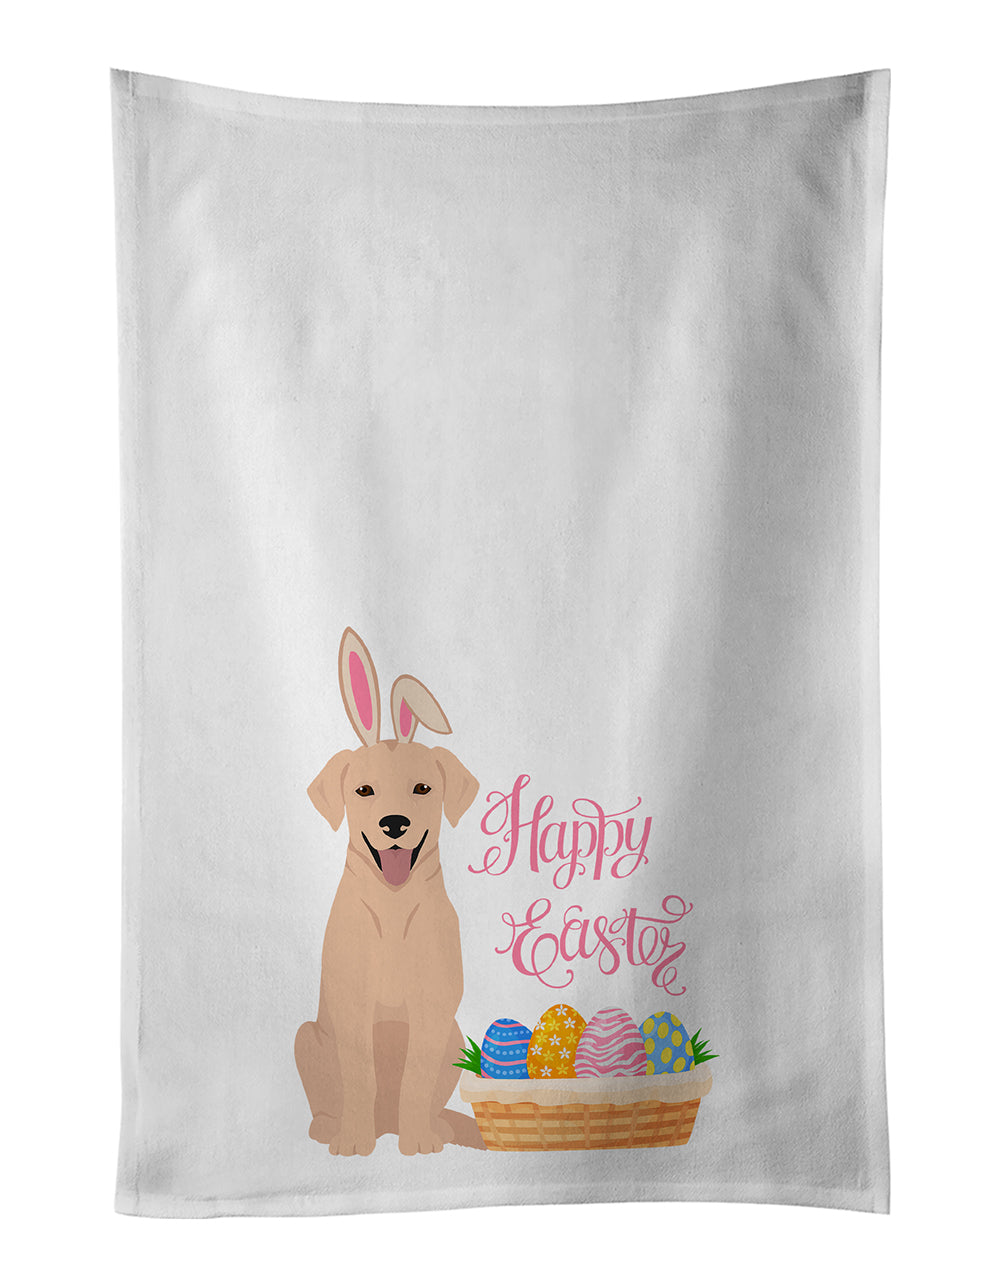 Buy this Yellow Labrador Retriever Easter White Kitchen Towel Set of 2 Dish Towels